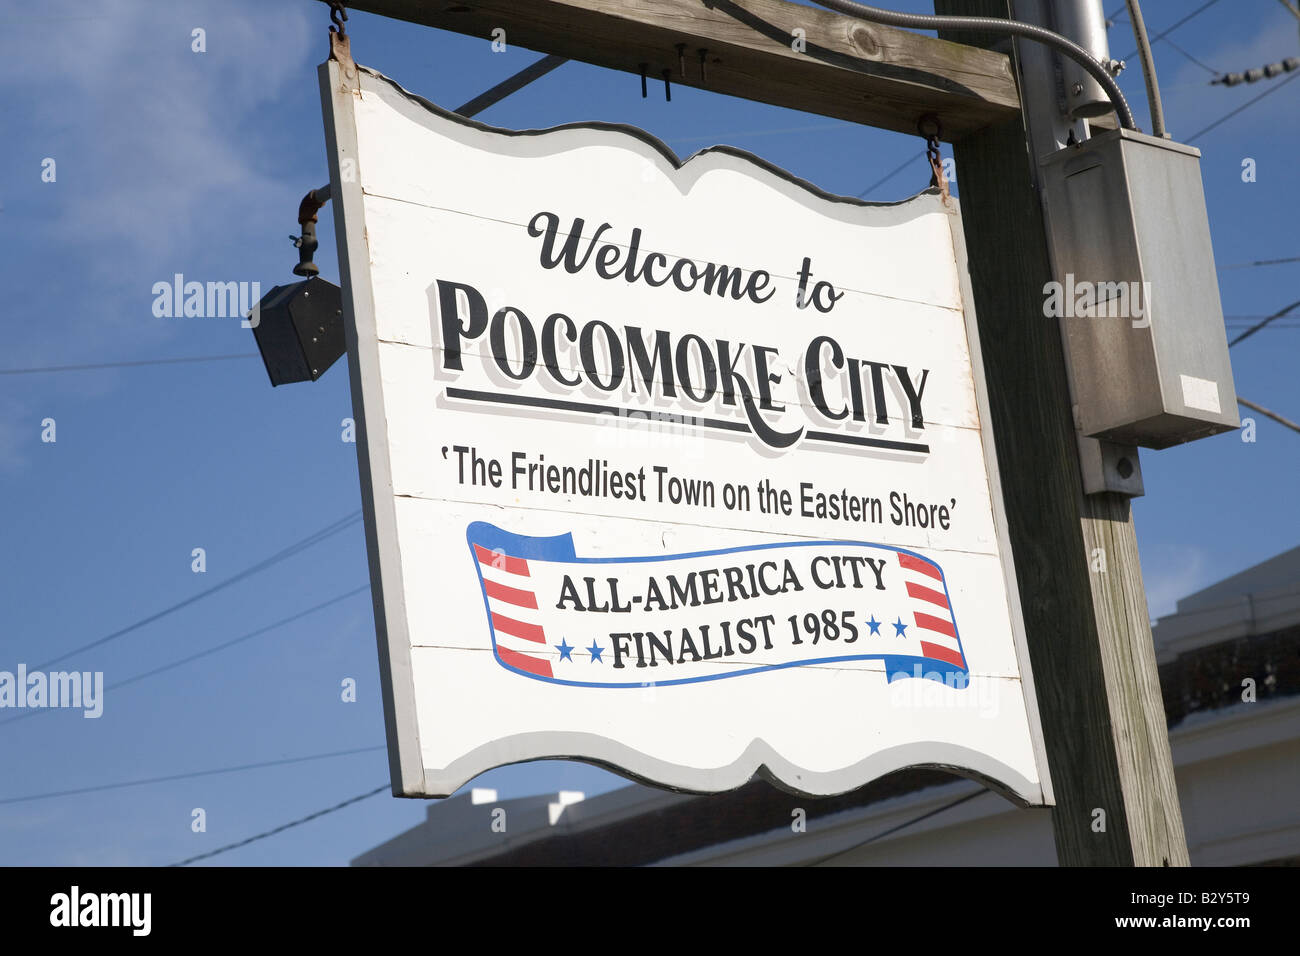 A sign reading 'Welcome to Pocomoke City', the Eastern Shore of Maryland Stock Photo